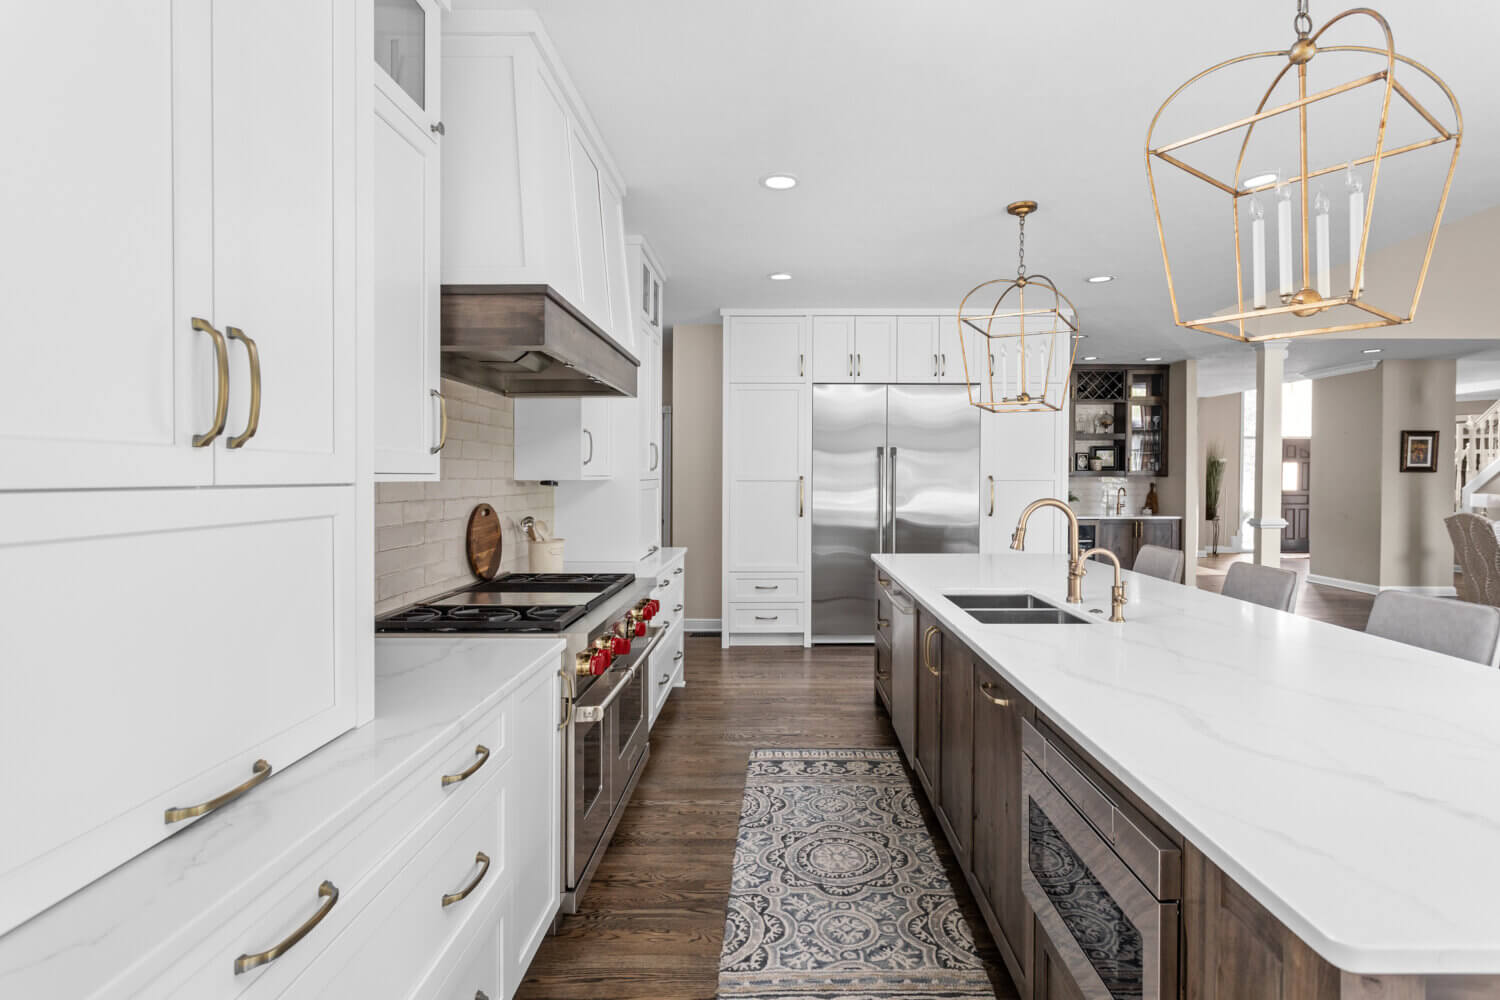 A beautiful kitchen remodel with white cabinets and rustic wood cabinets featuring a kitchen island and a two-toned wood hood.